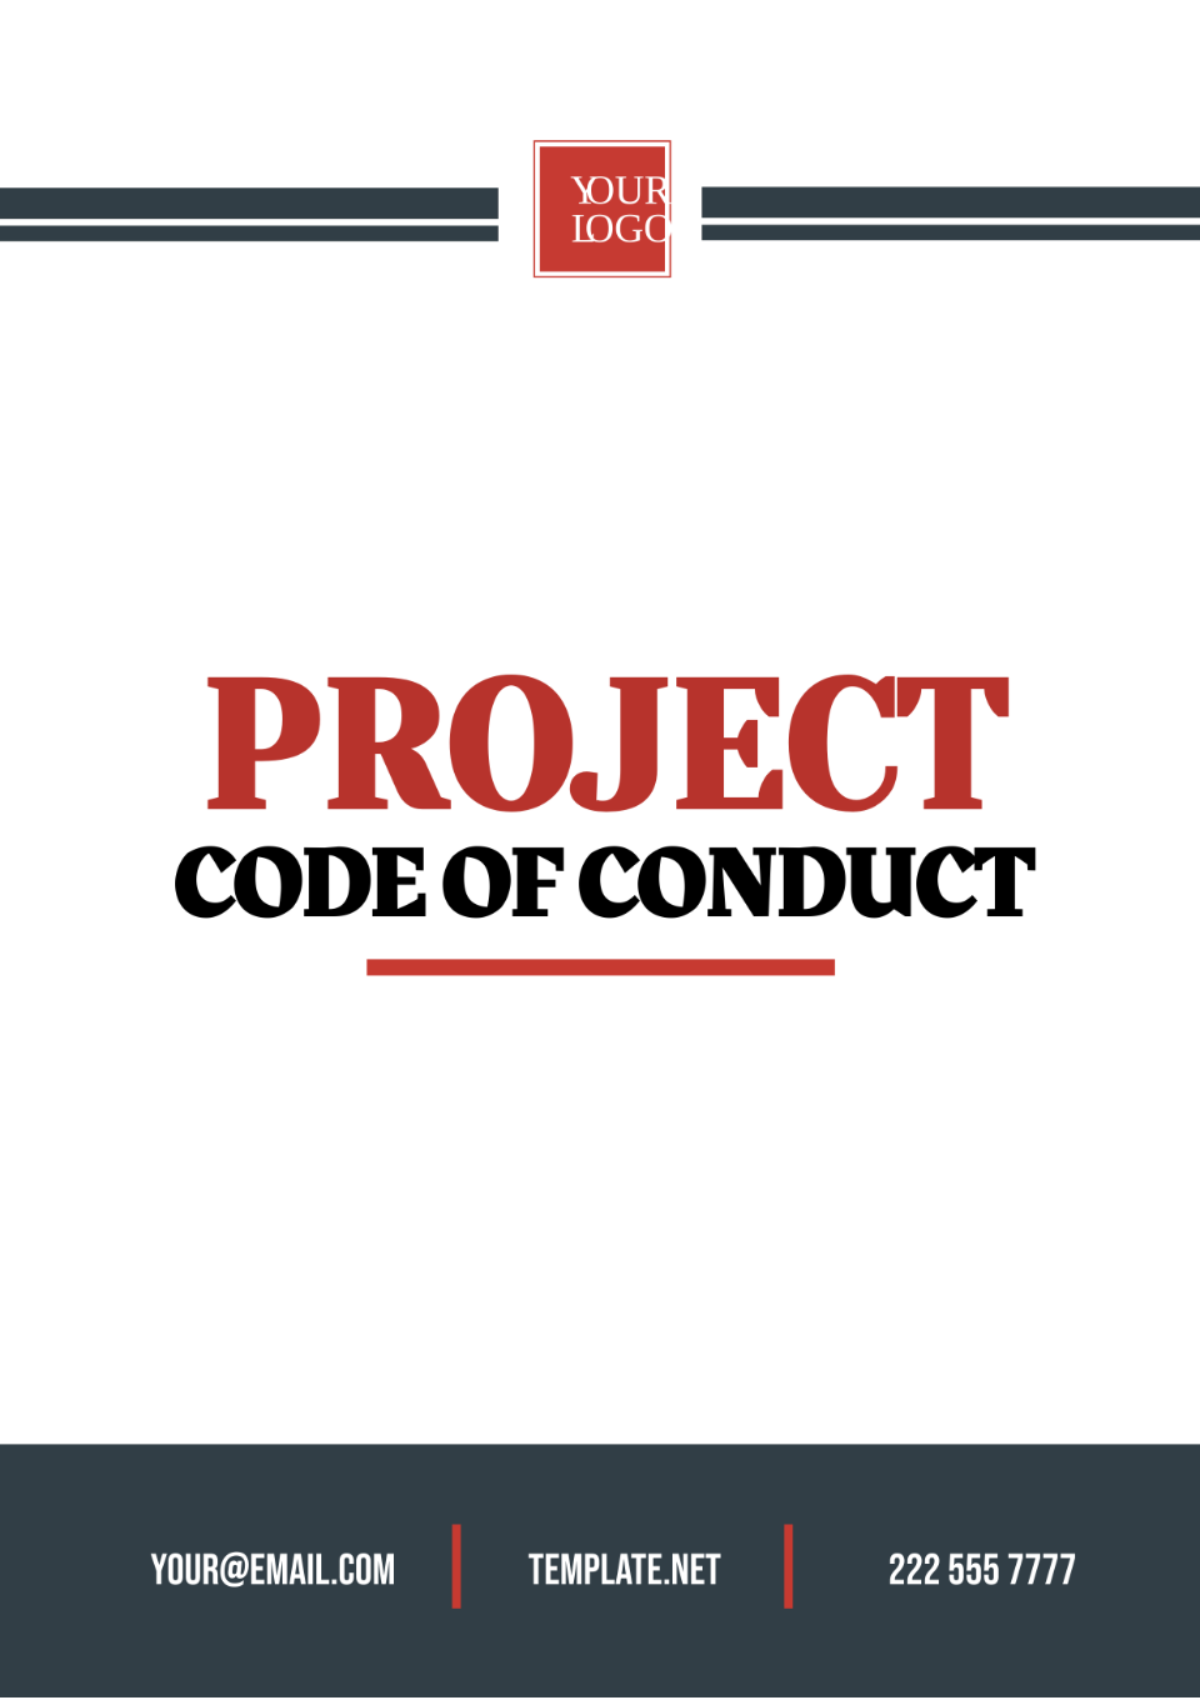 Project Code of Conduct Template